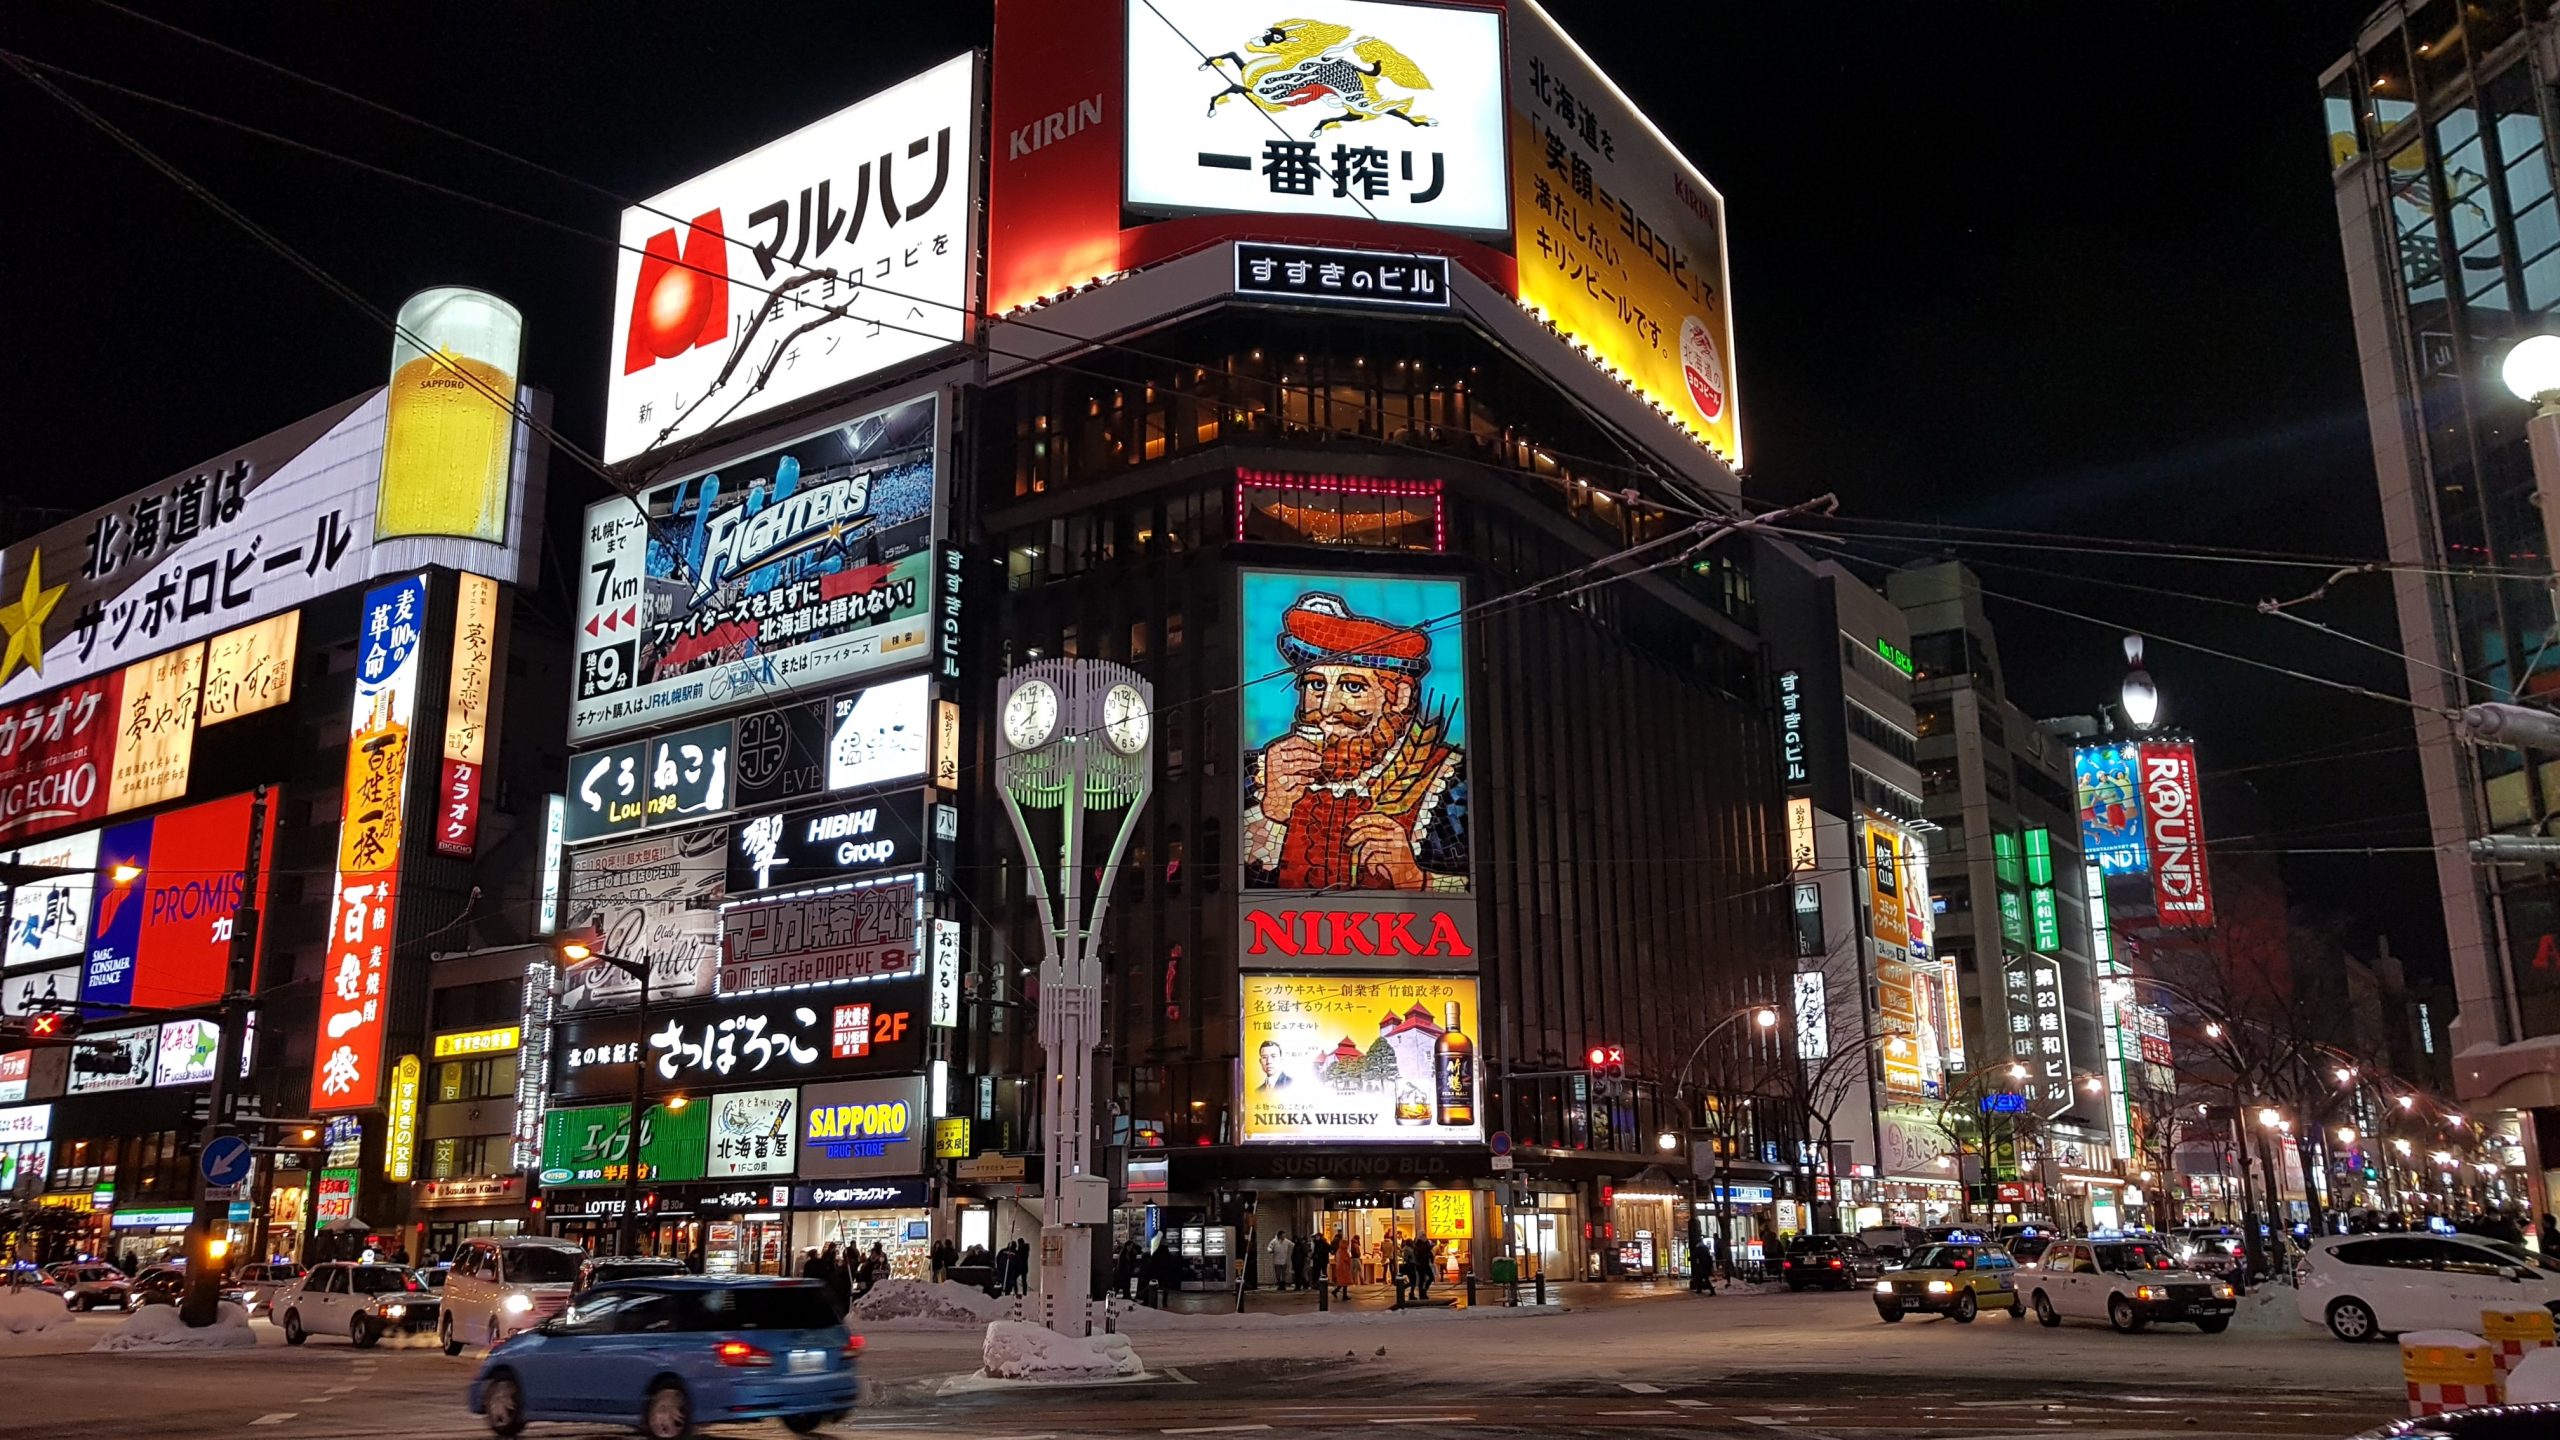 Susukino Sapporo is the best place to stay for nightlife